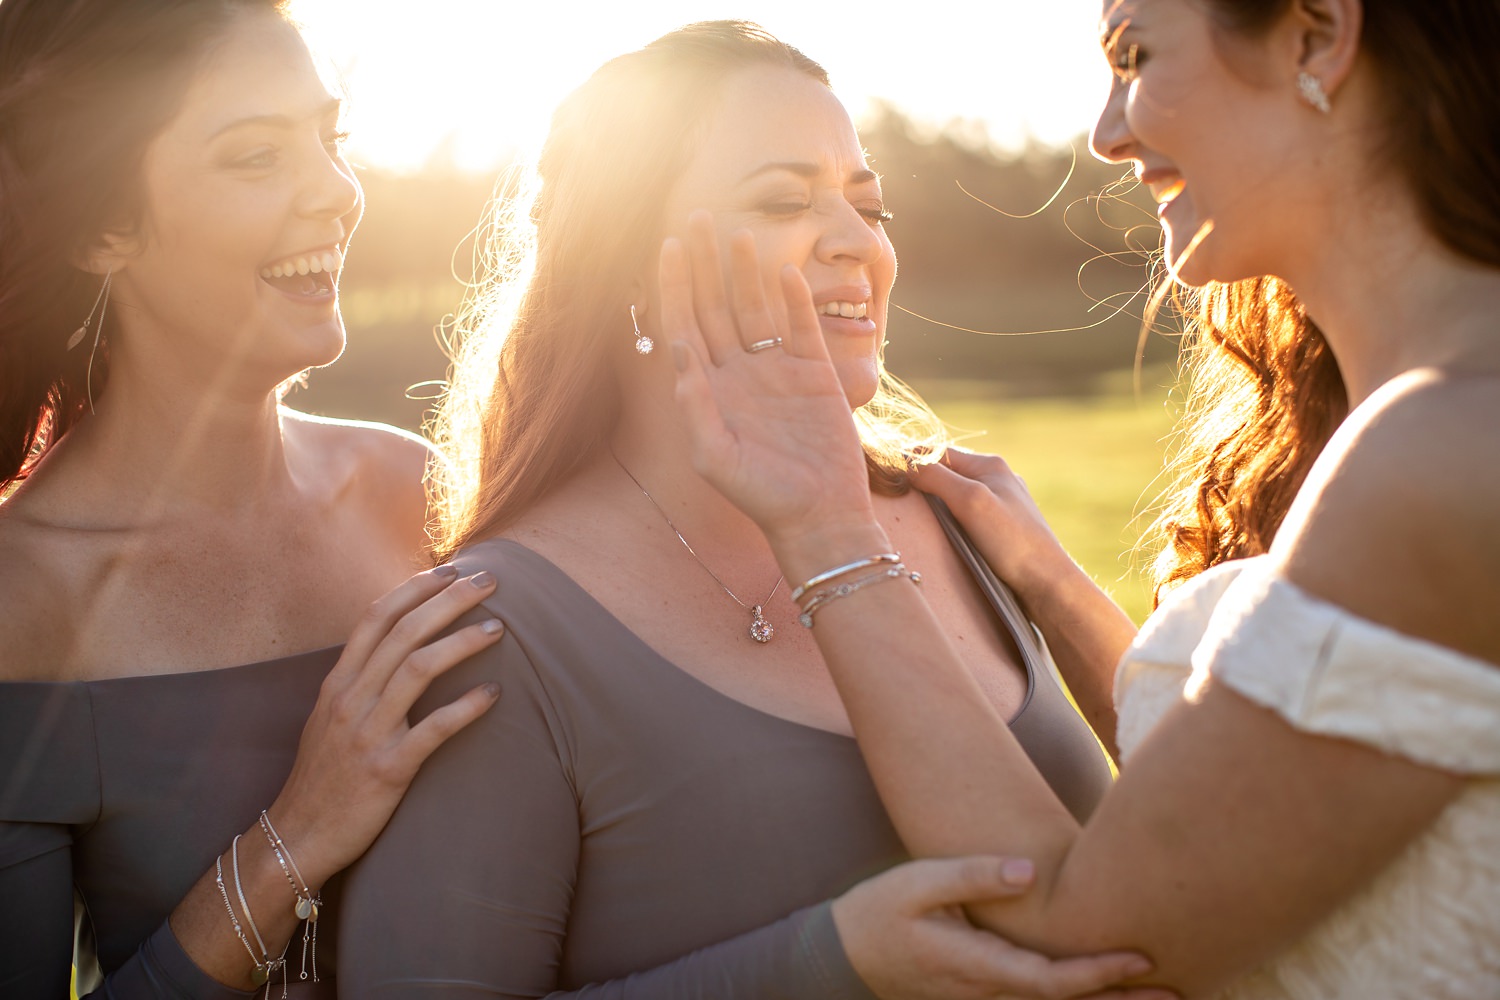 Wedding photographer in South Africa, Niki M Photography uses late afternoon sun to light up the bride and her bridesmaids as they laugh